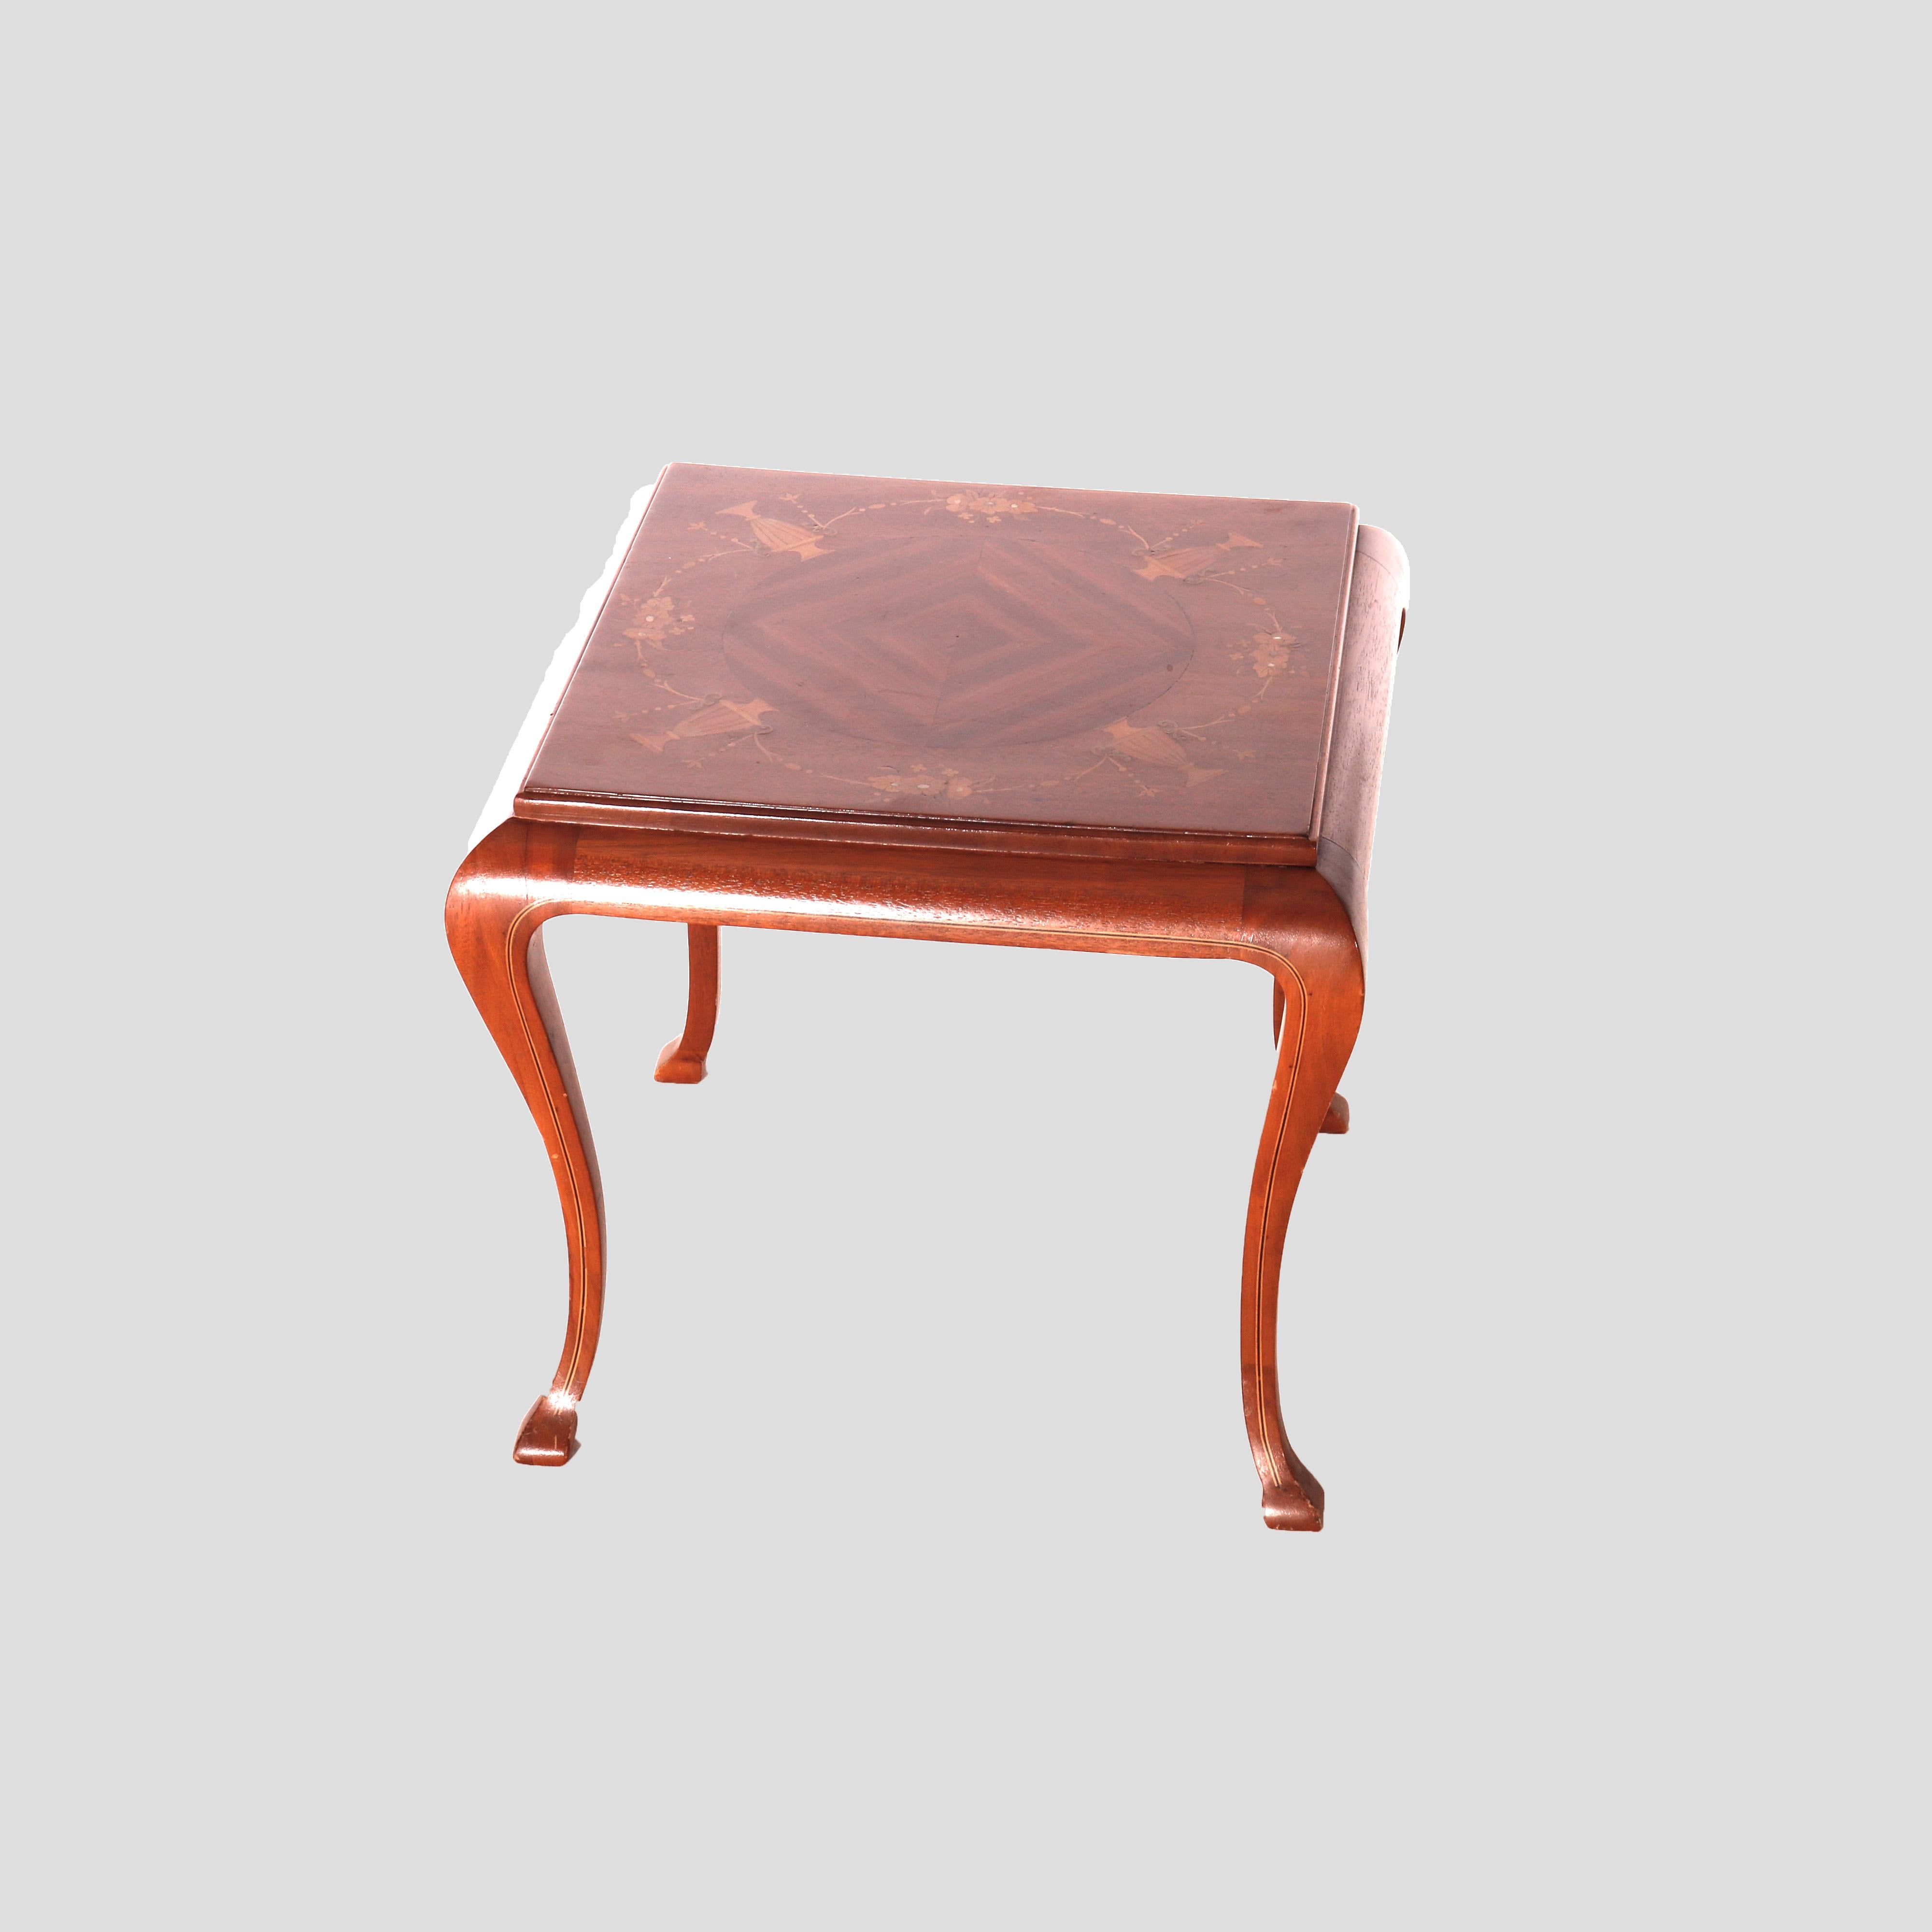 A French style side table offers mahogany construction with bookmatched top having satinwood marquetry urns, raised on cabriole legs, 20th century

Measures - 15